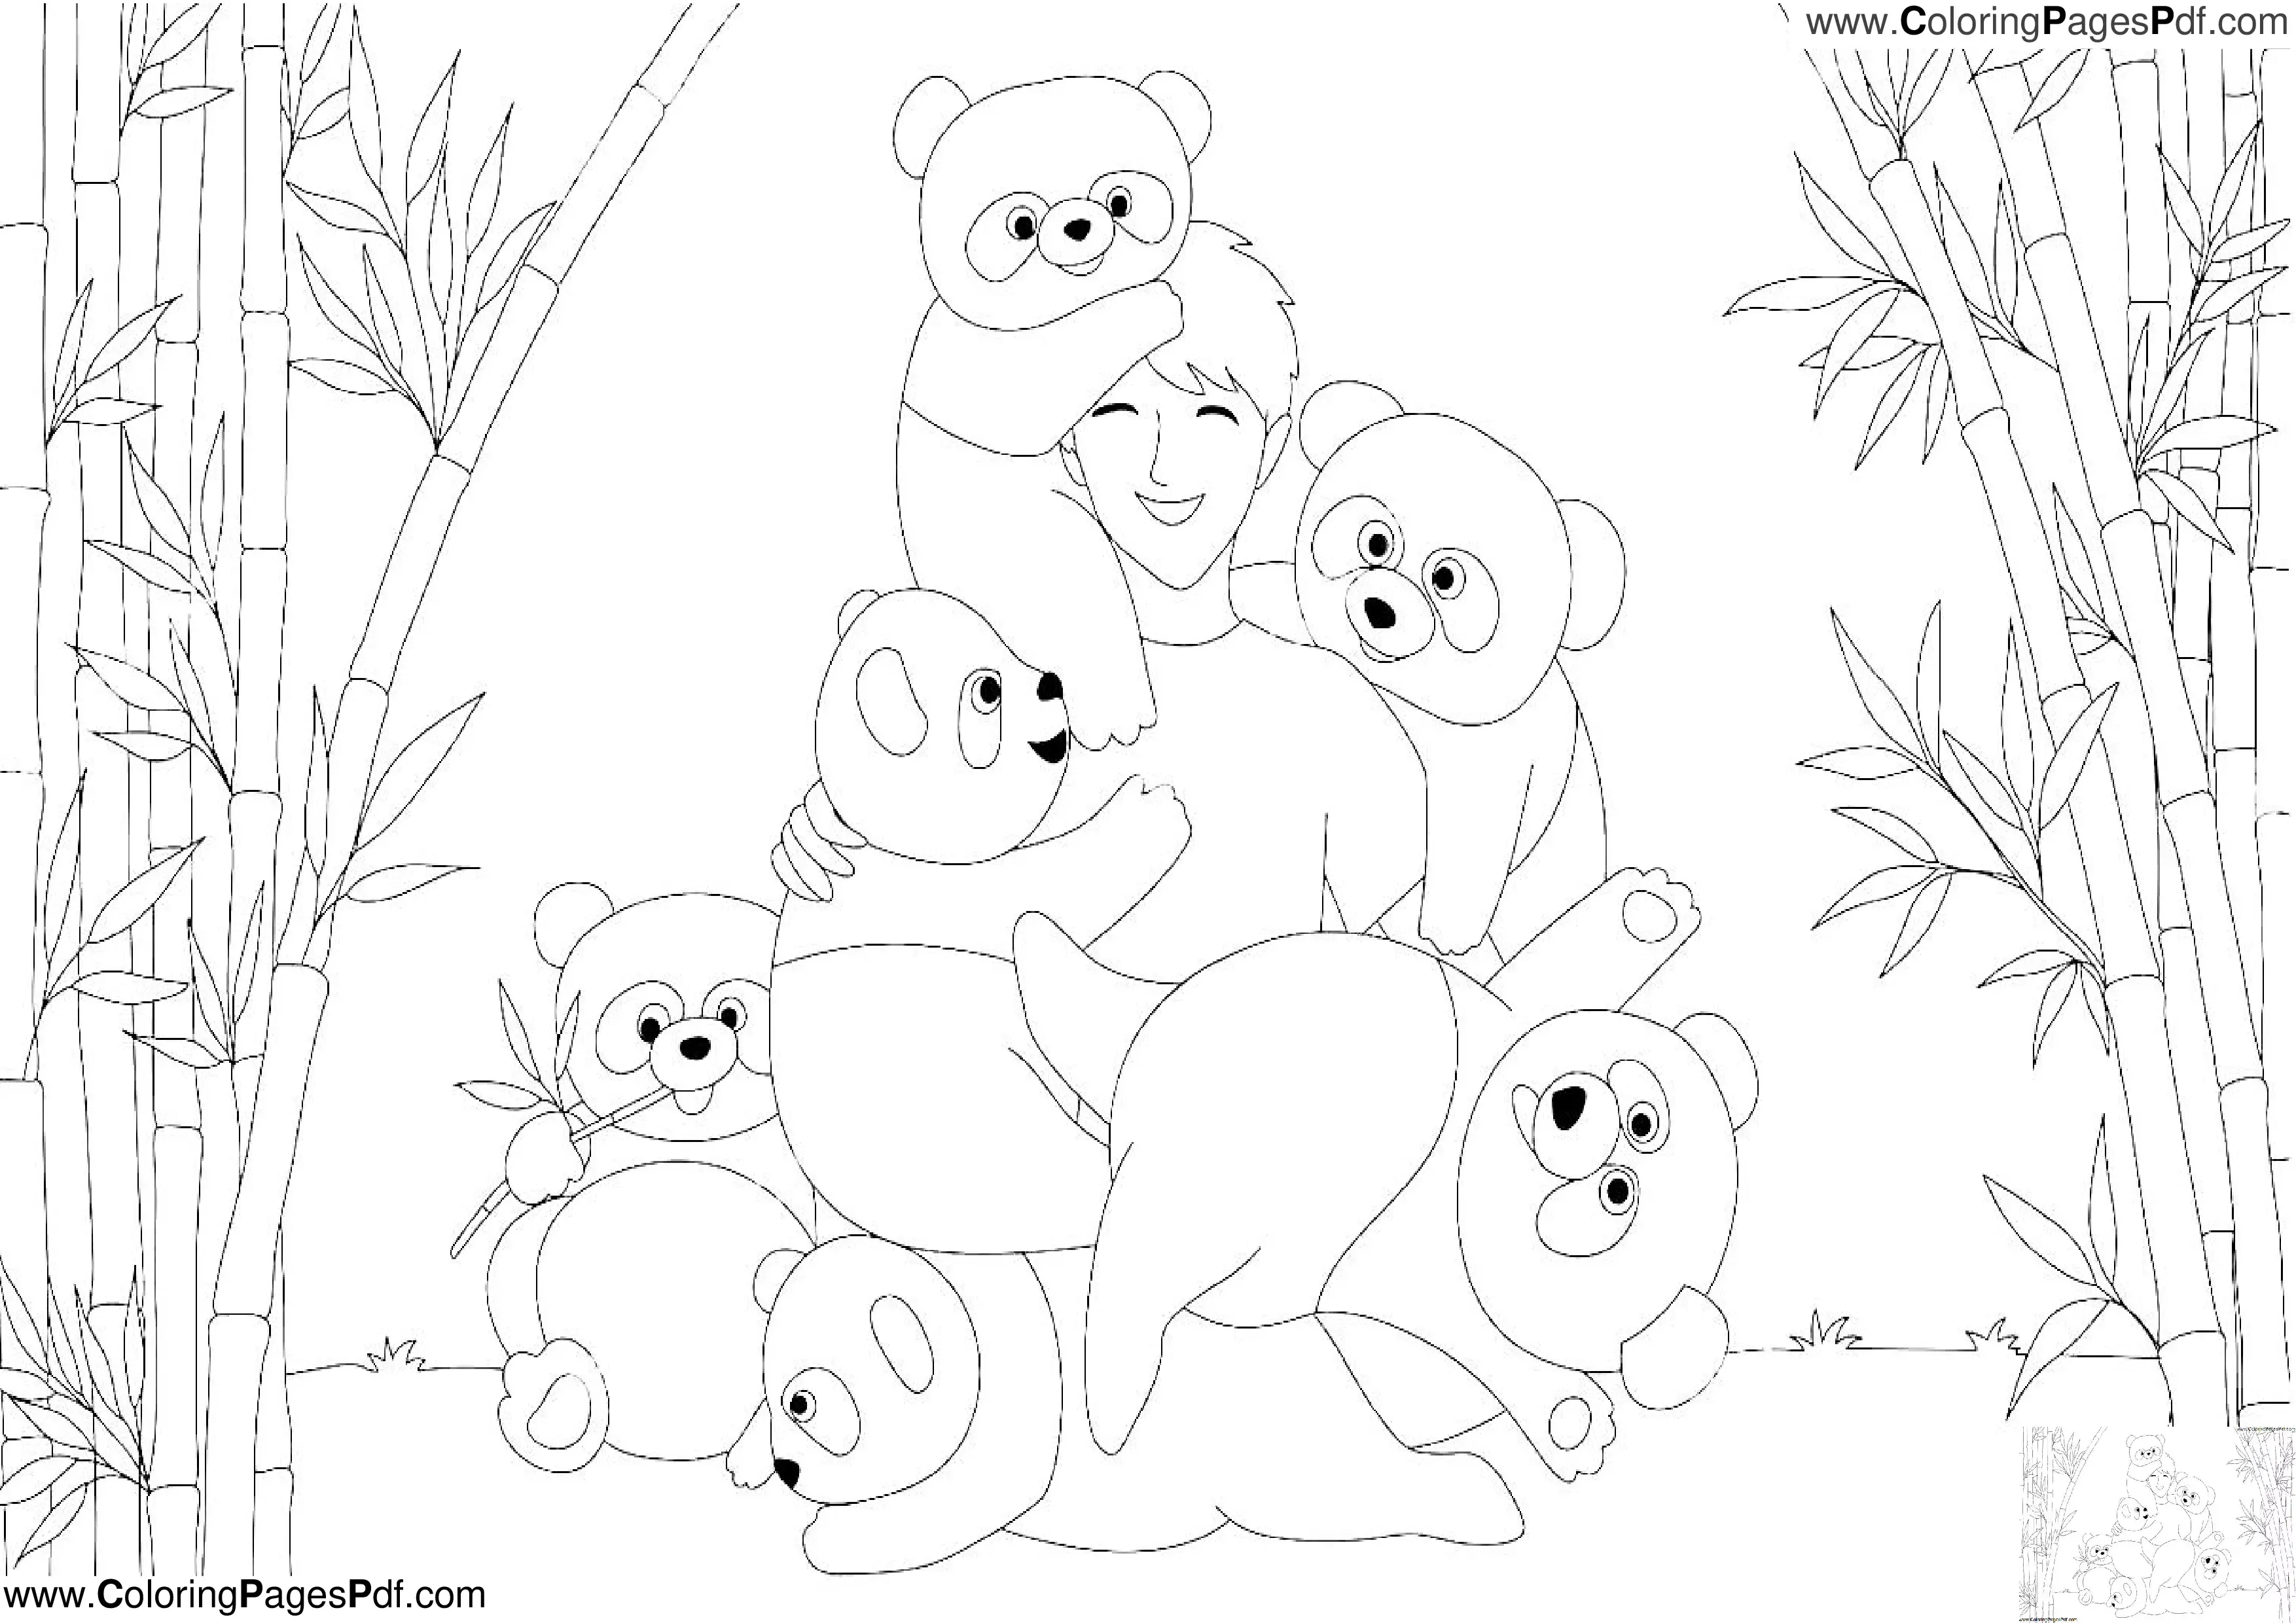 Cute baby panda coloring pages